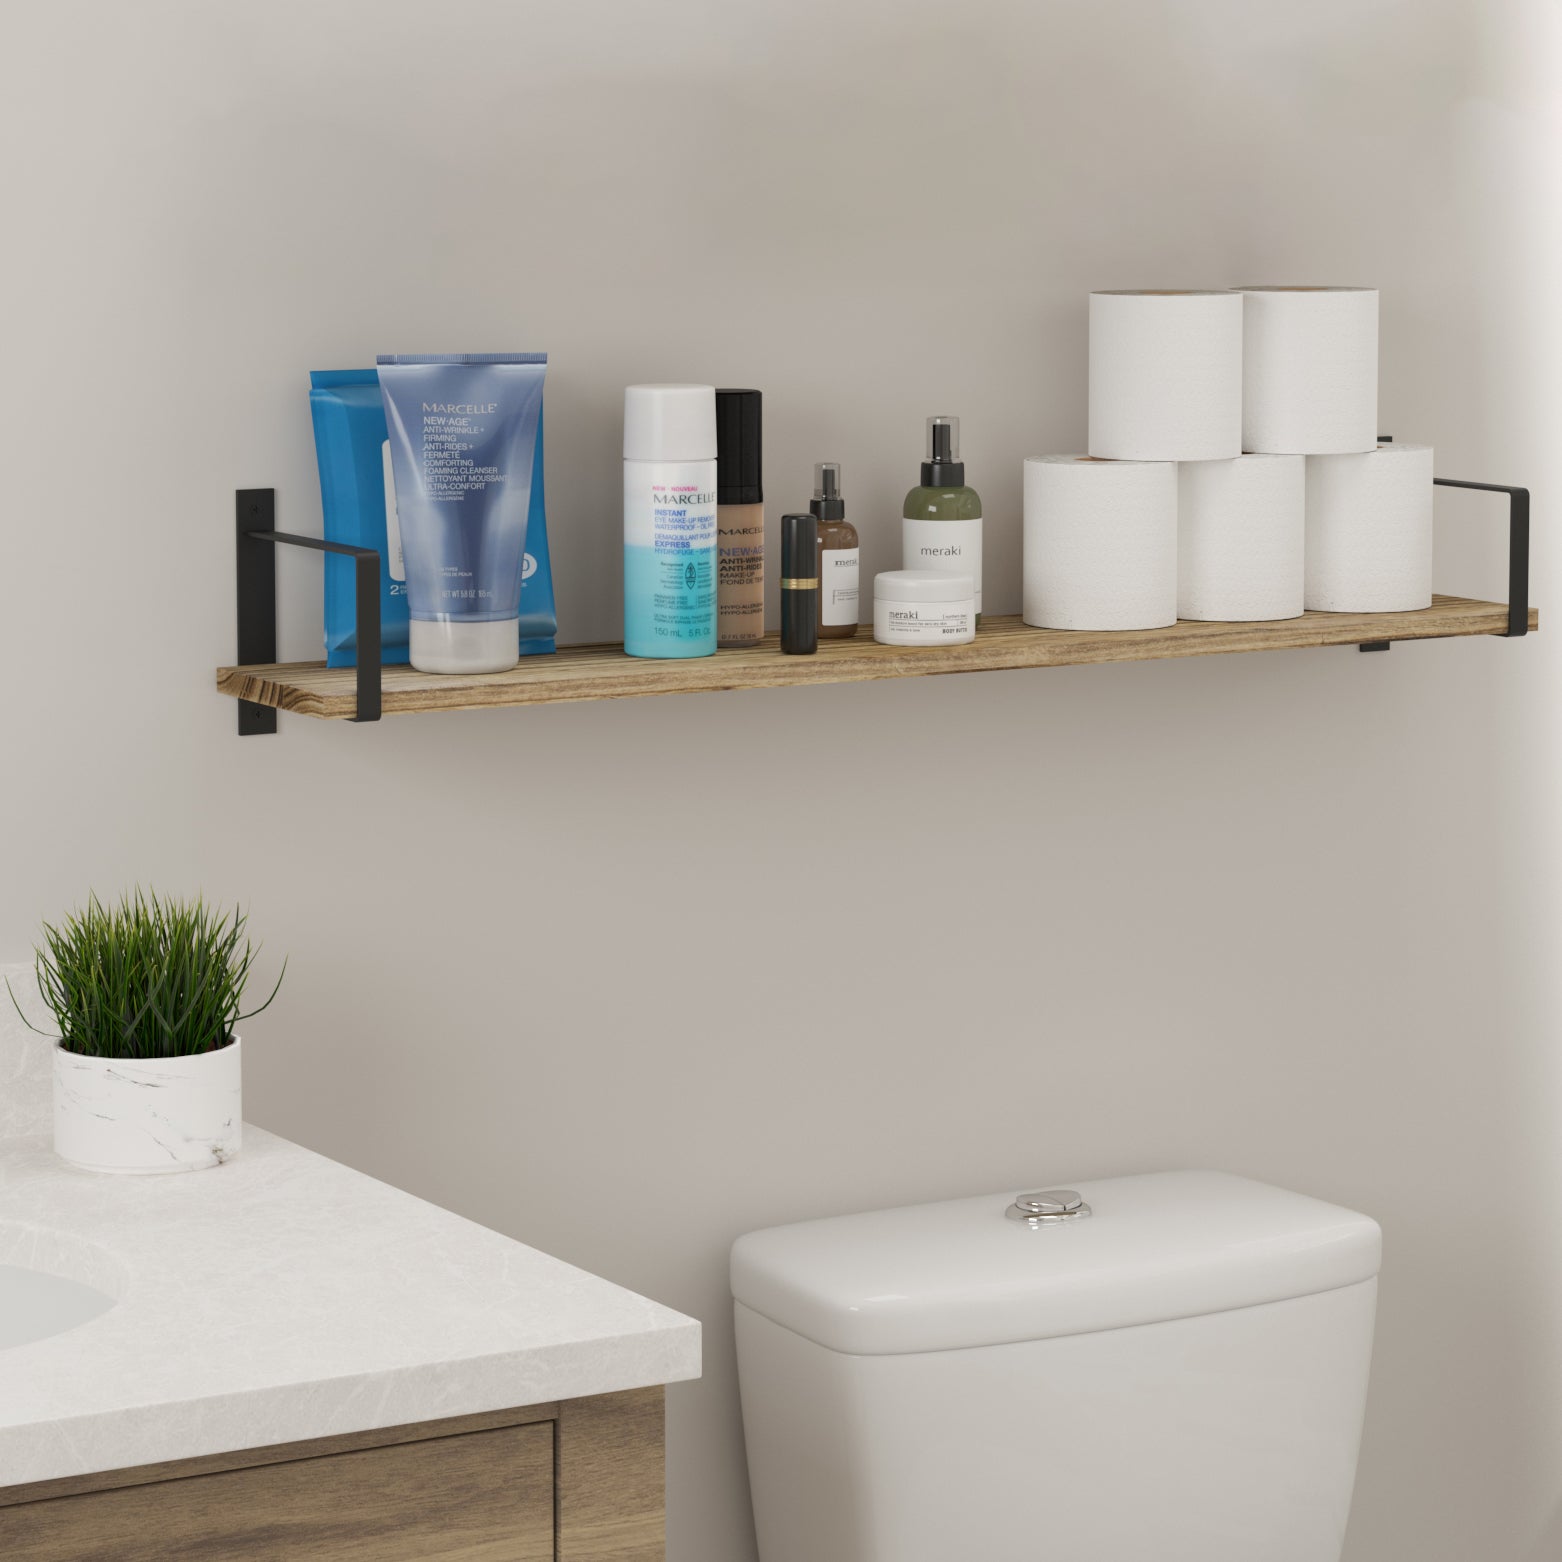 Bathroom wall shelf neatly organized with skincare products and toilet rolls, enhancing the room's clean look and bathroom shelf decor.